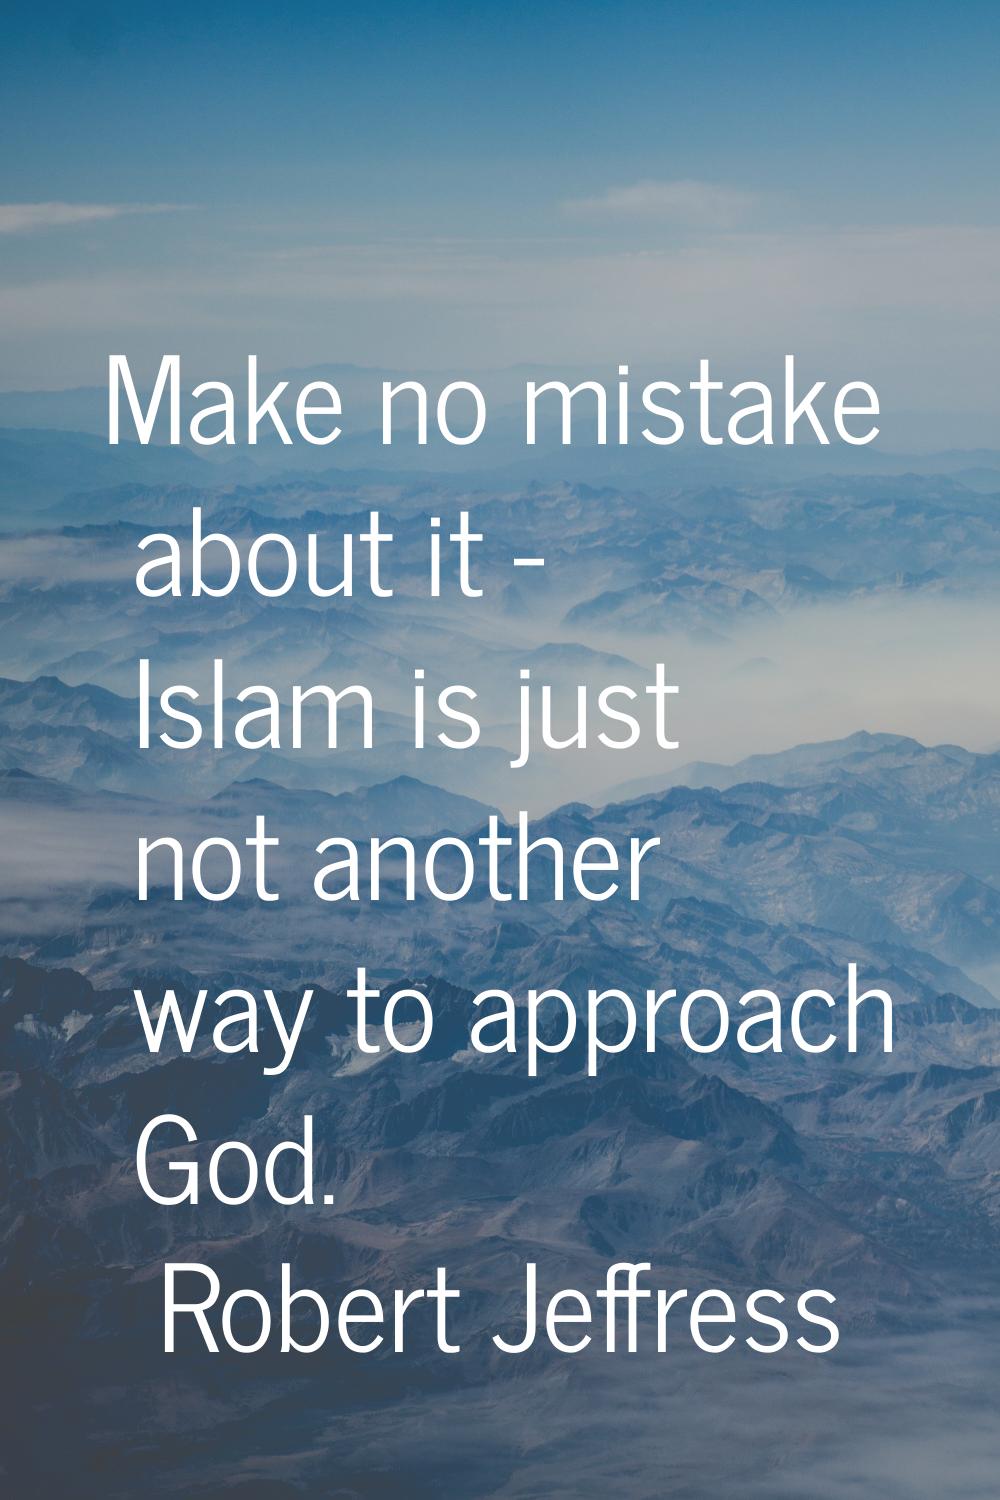 Make no mistake about it - Islam is just not another way to approach God.